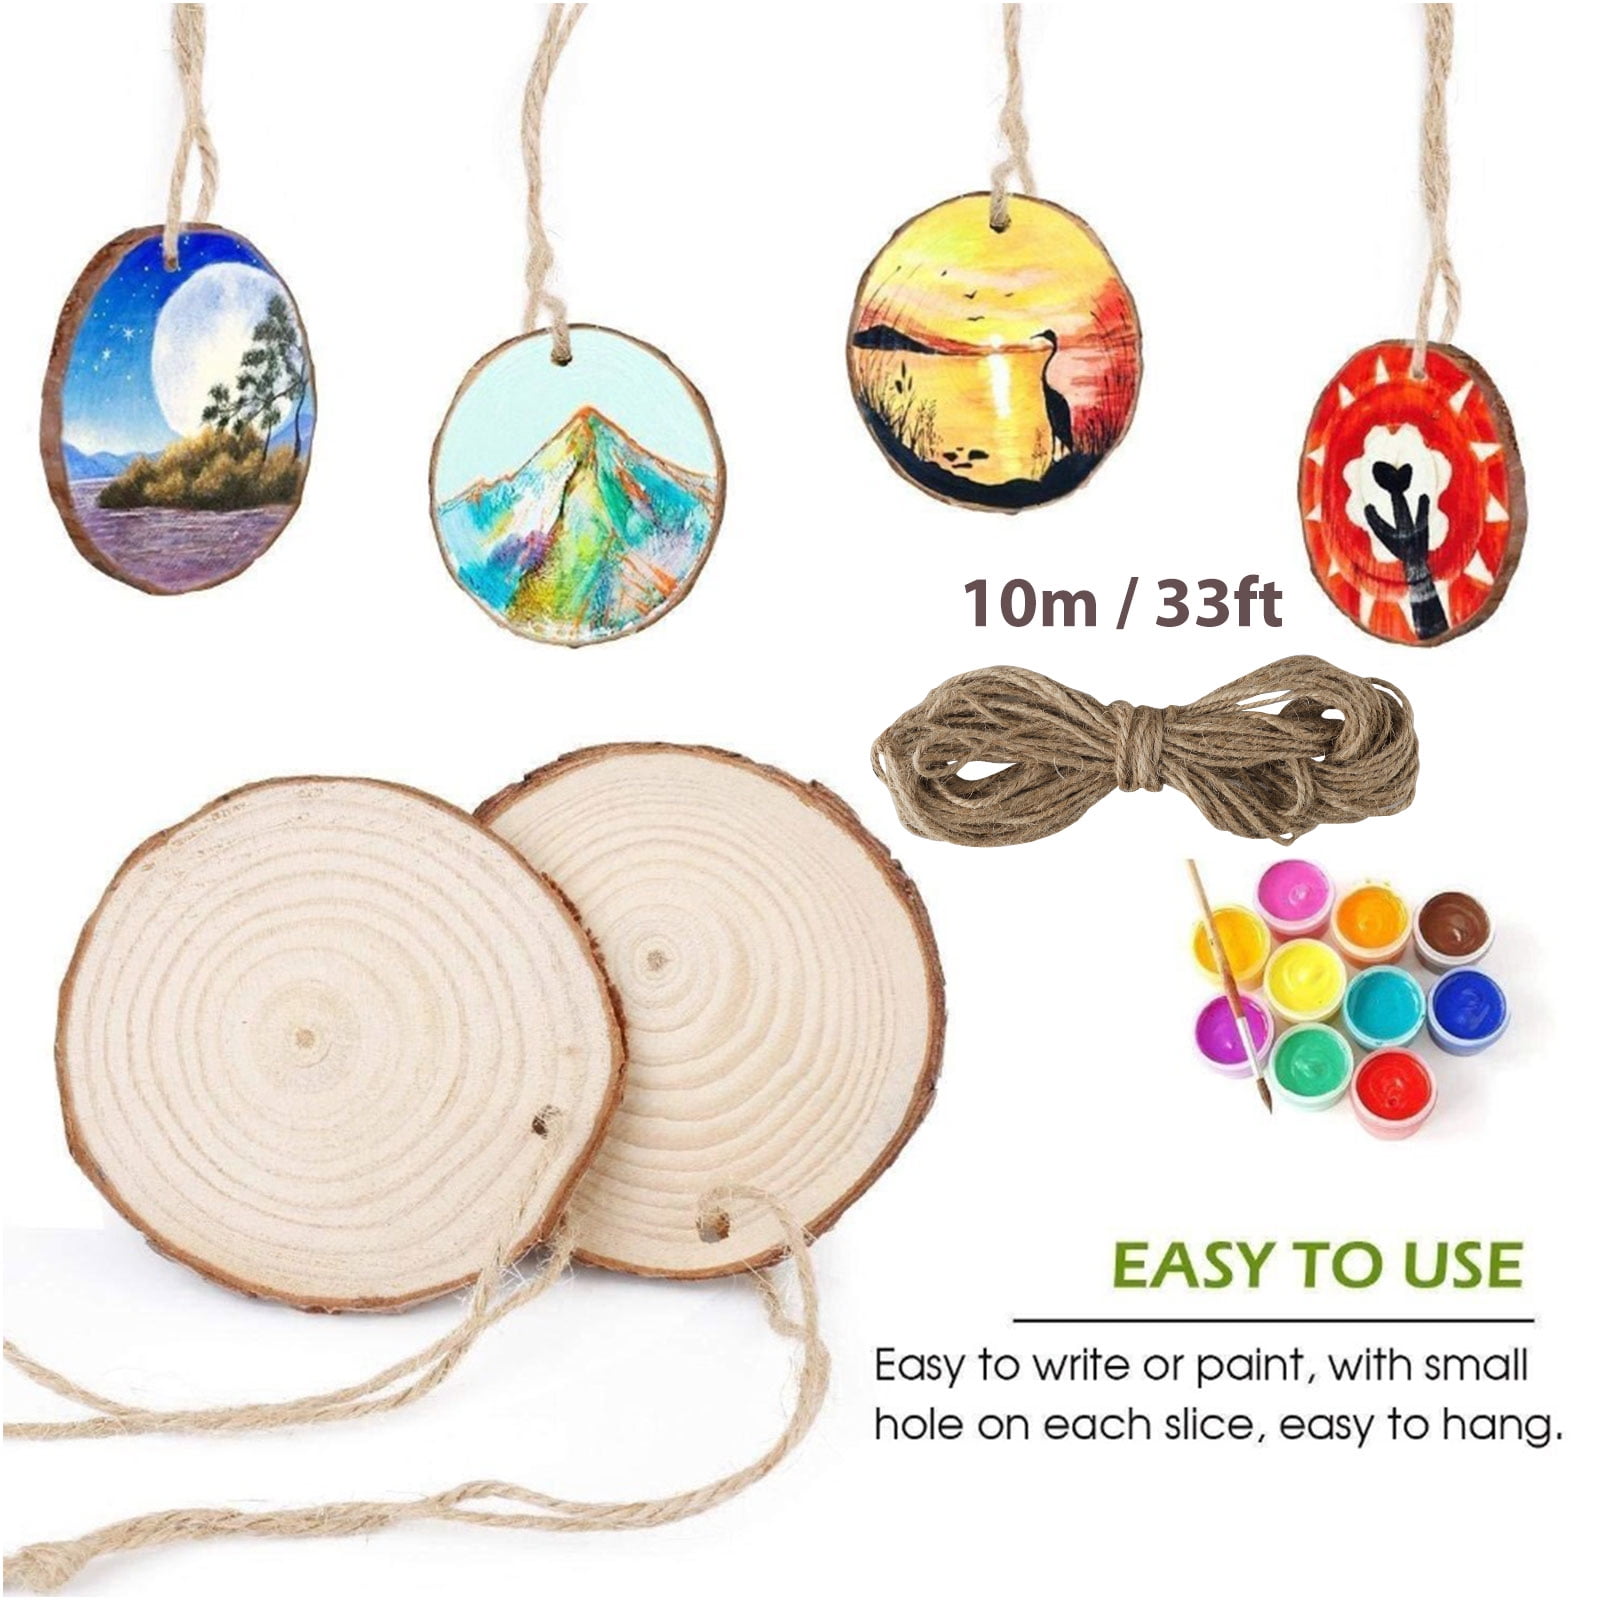 2020 New SENMUT Craft Unfinished Natural Wood Slices Christmas Ornament 30 Pcs 2.0-2.4 inches Wooden Cutouts for DIY Crafts Predrilled Tree Slices with an sAlloy Circles 